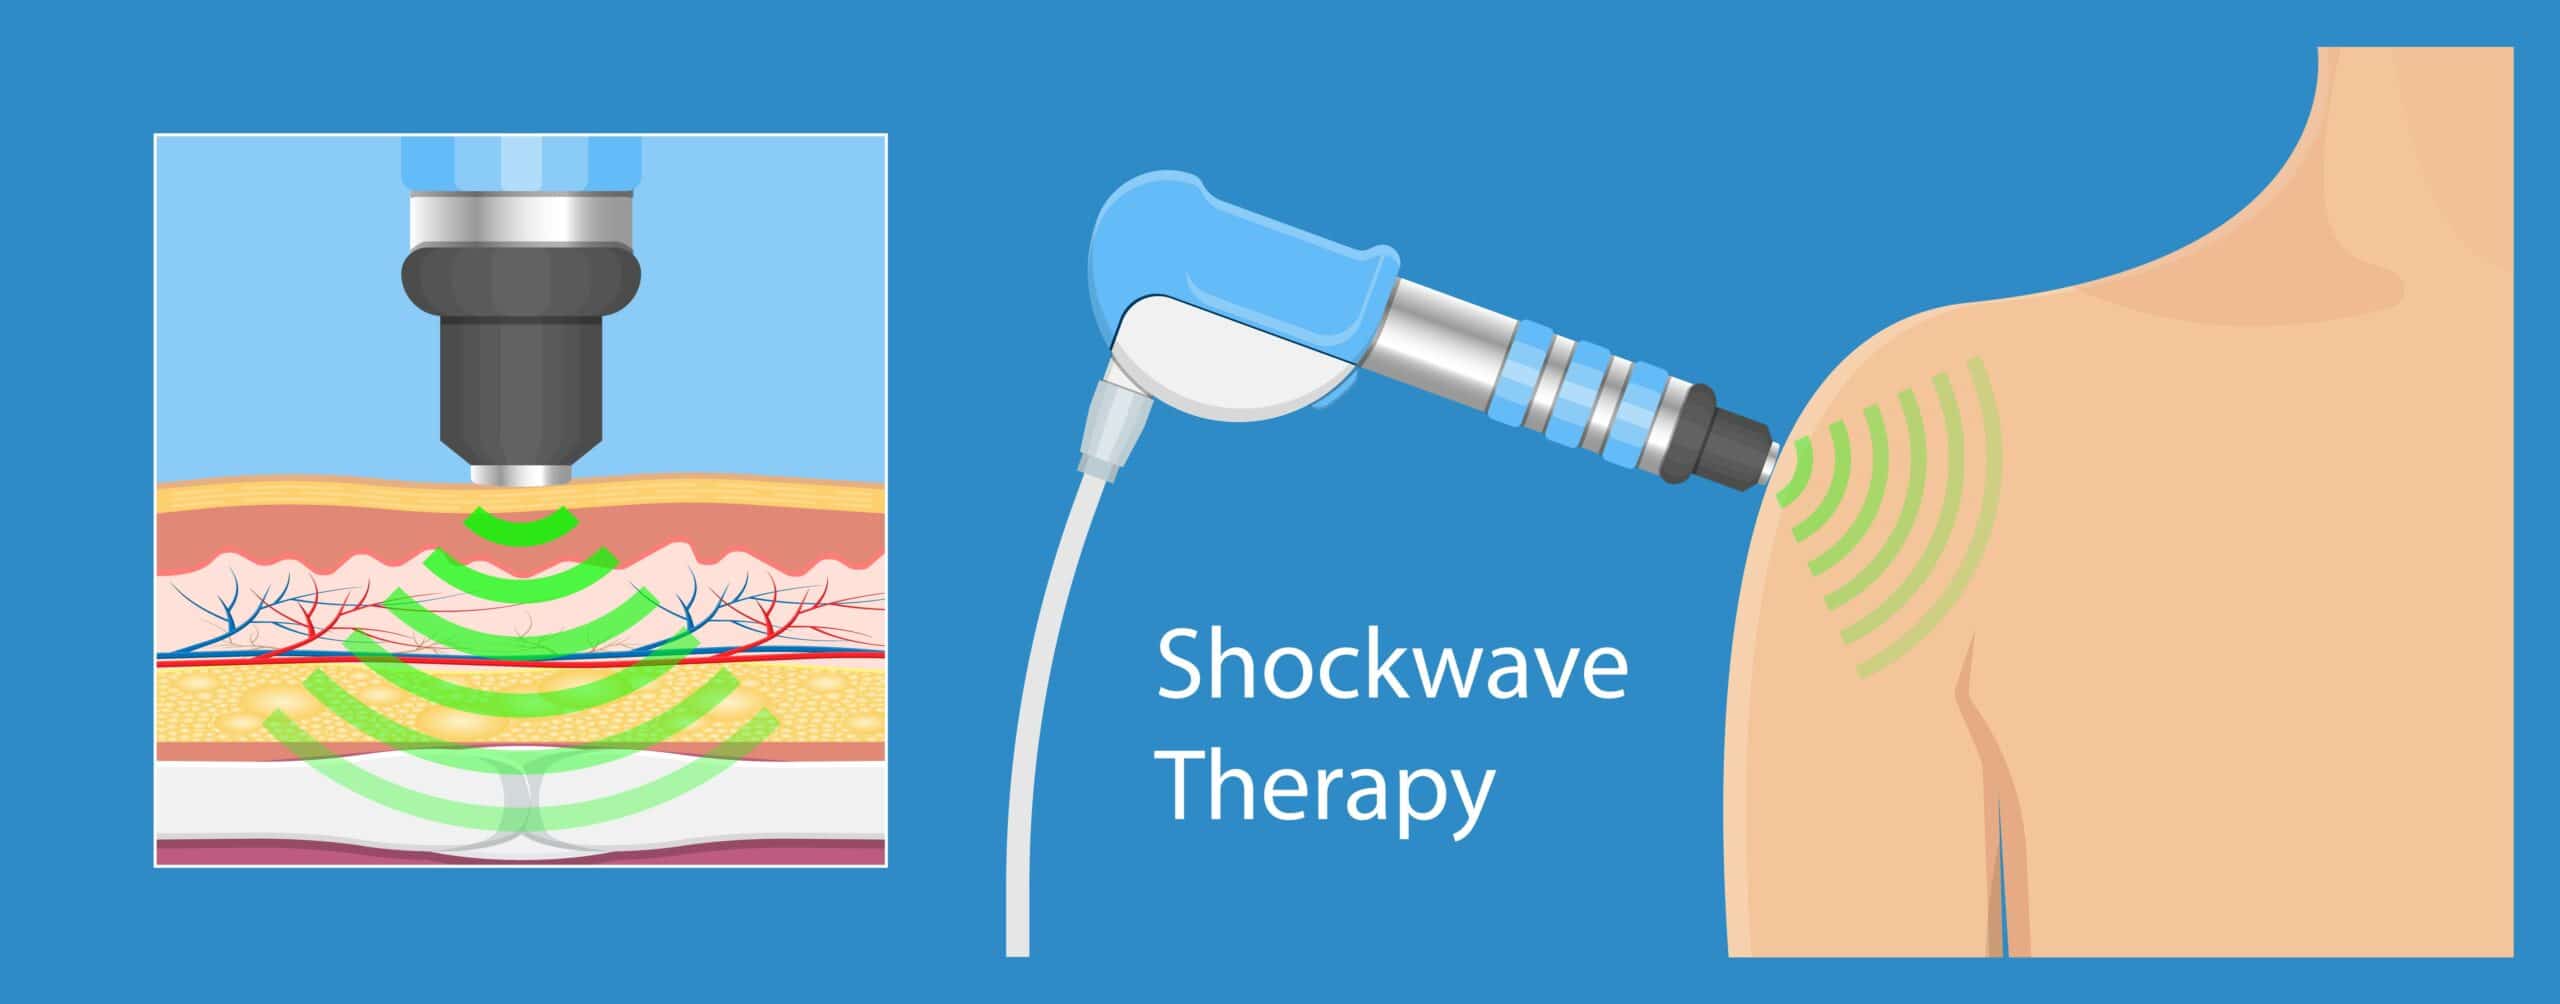 The Facts About Shockwave Therapy Revealed